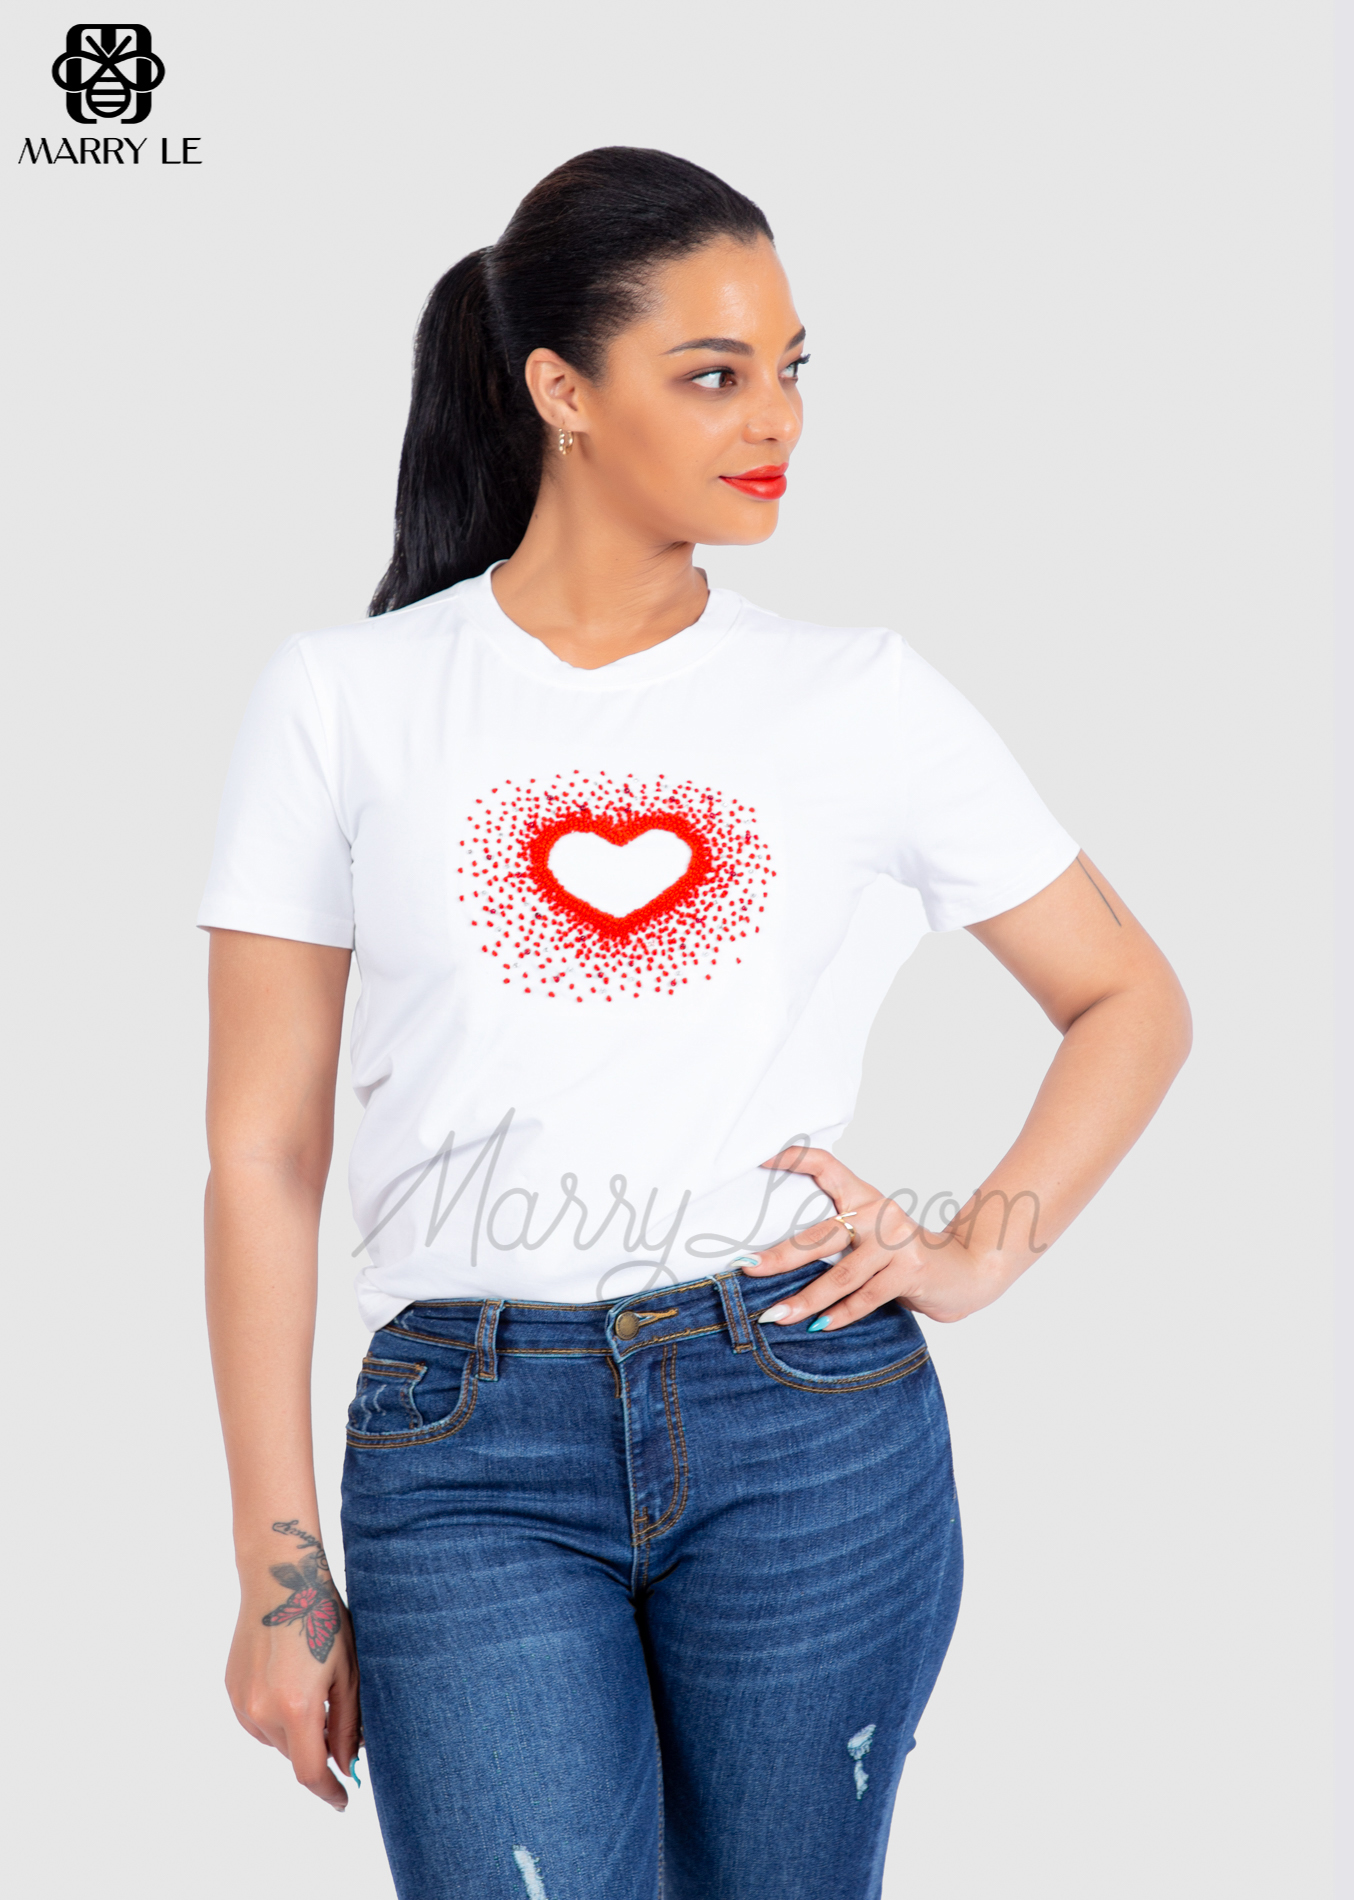 ROMANTIC WHITE WOMEN HEART BEAD EMBROIDERED T-SHIRT - MD195